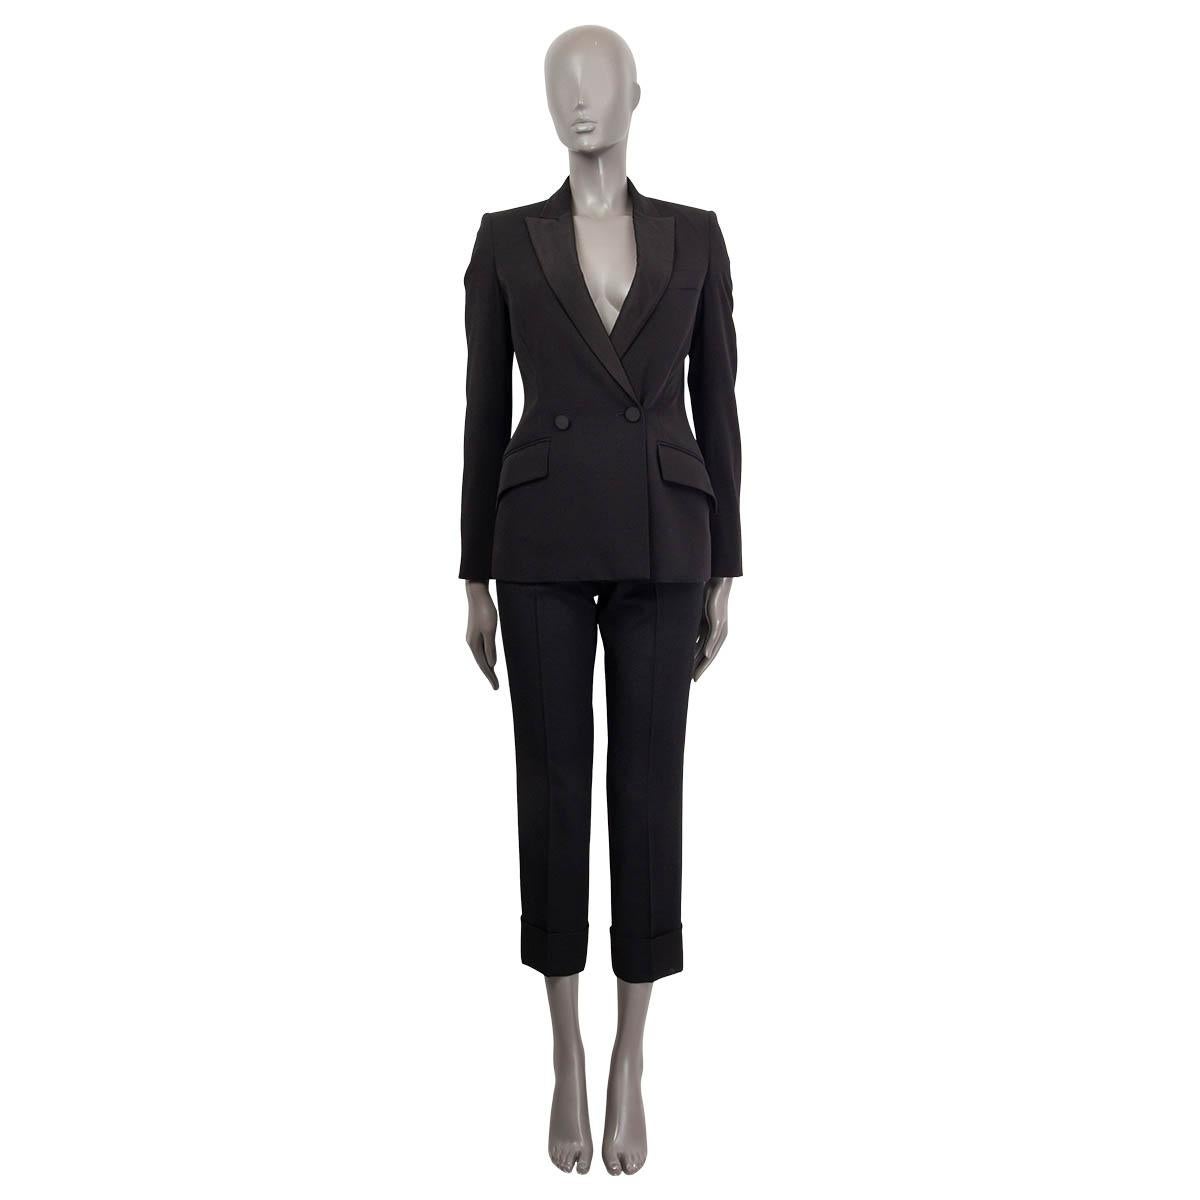 100% authentic Stella McCartney Peak Lapel Tuxedo Blazer in black wool (100%) and lined in viscose (100%). Collar and lapels are made of grosgrain fabric. Blazer closes with two buttons and features two flap pockets and one chest pocket at front.